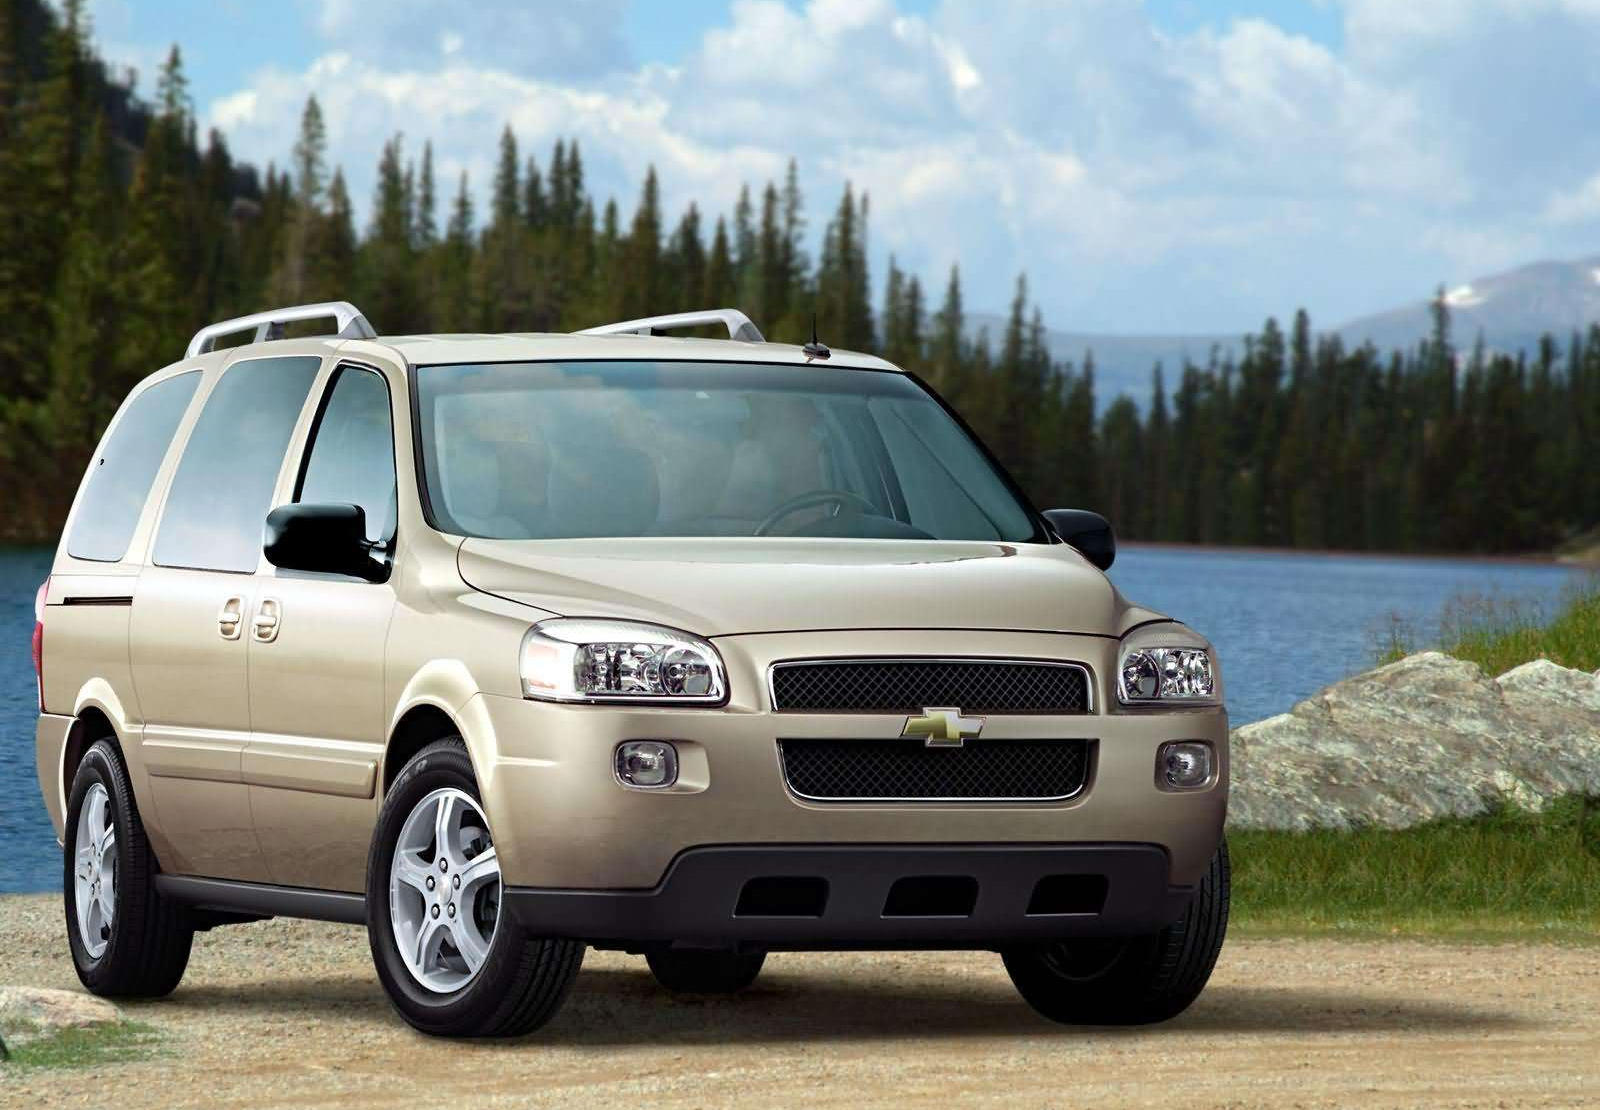 2008 Chevrolet Uplander Front Angle View